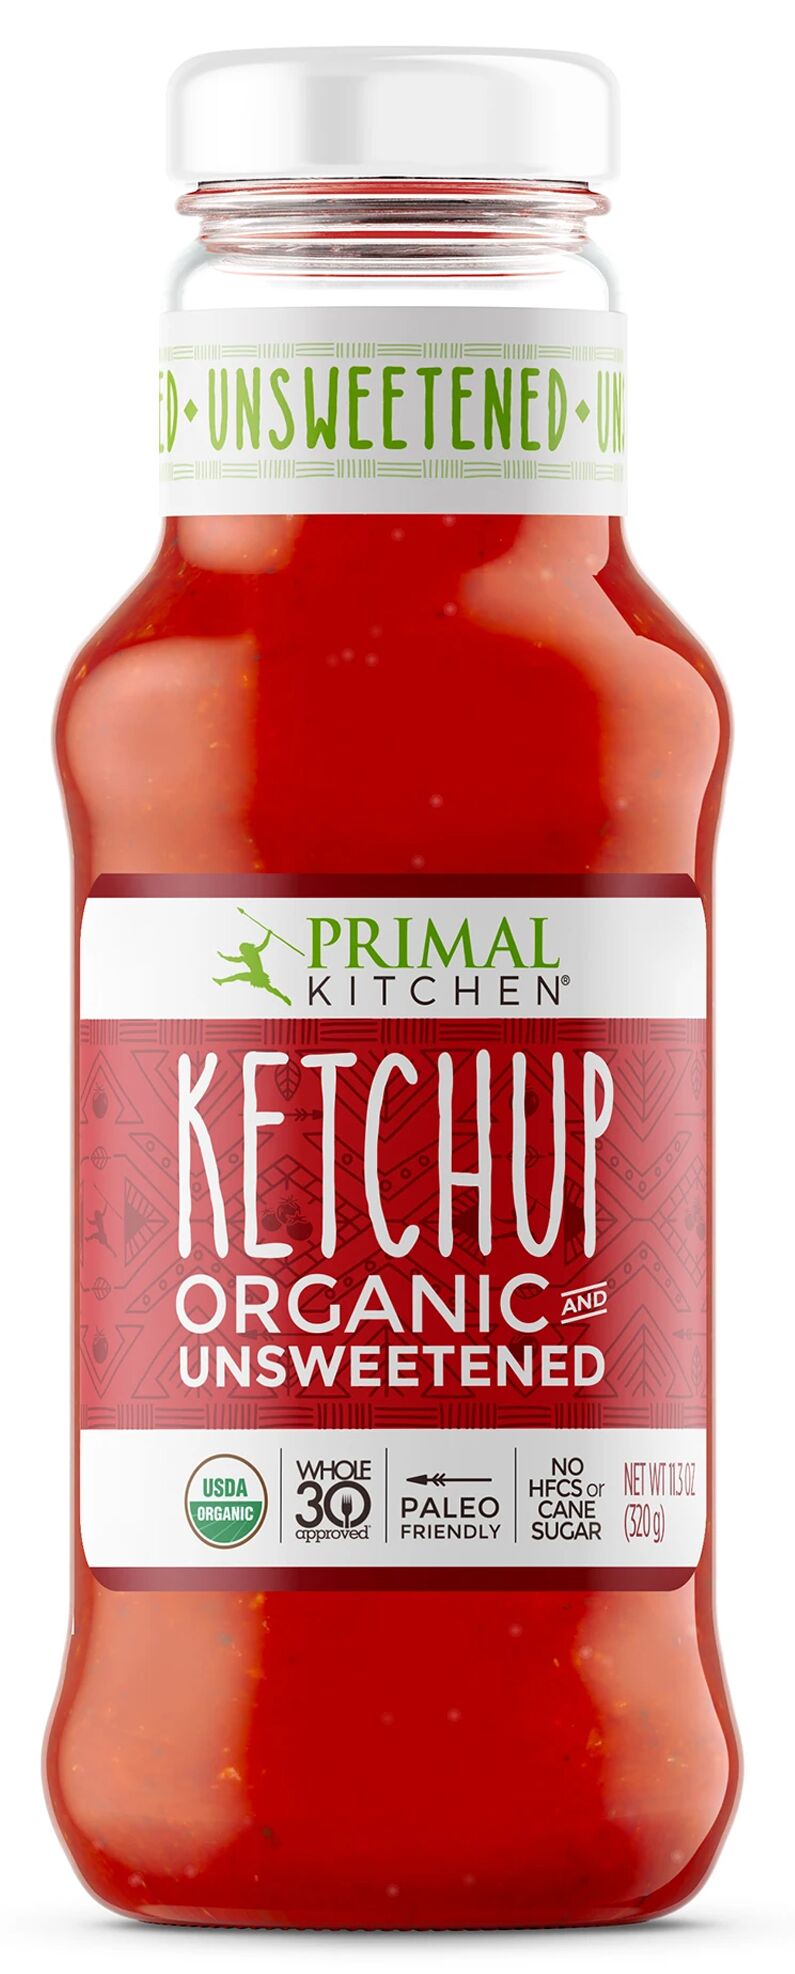 Primal Kitchen Ketchup Review - The Nutrition Insider